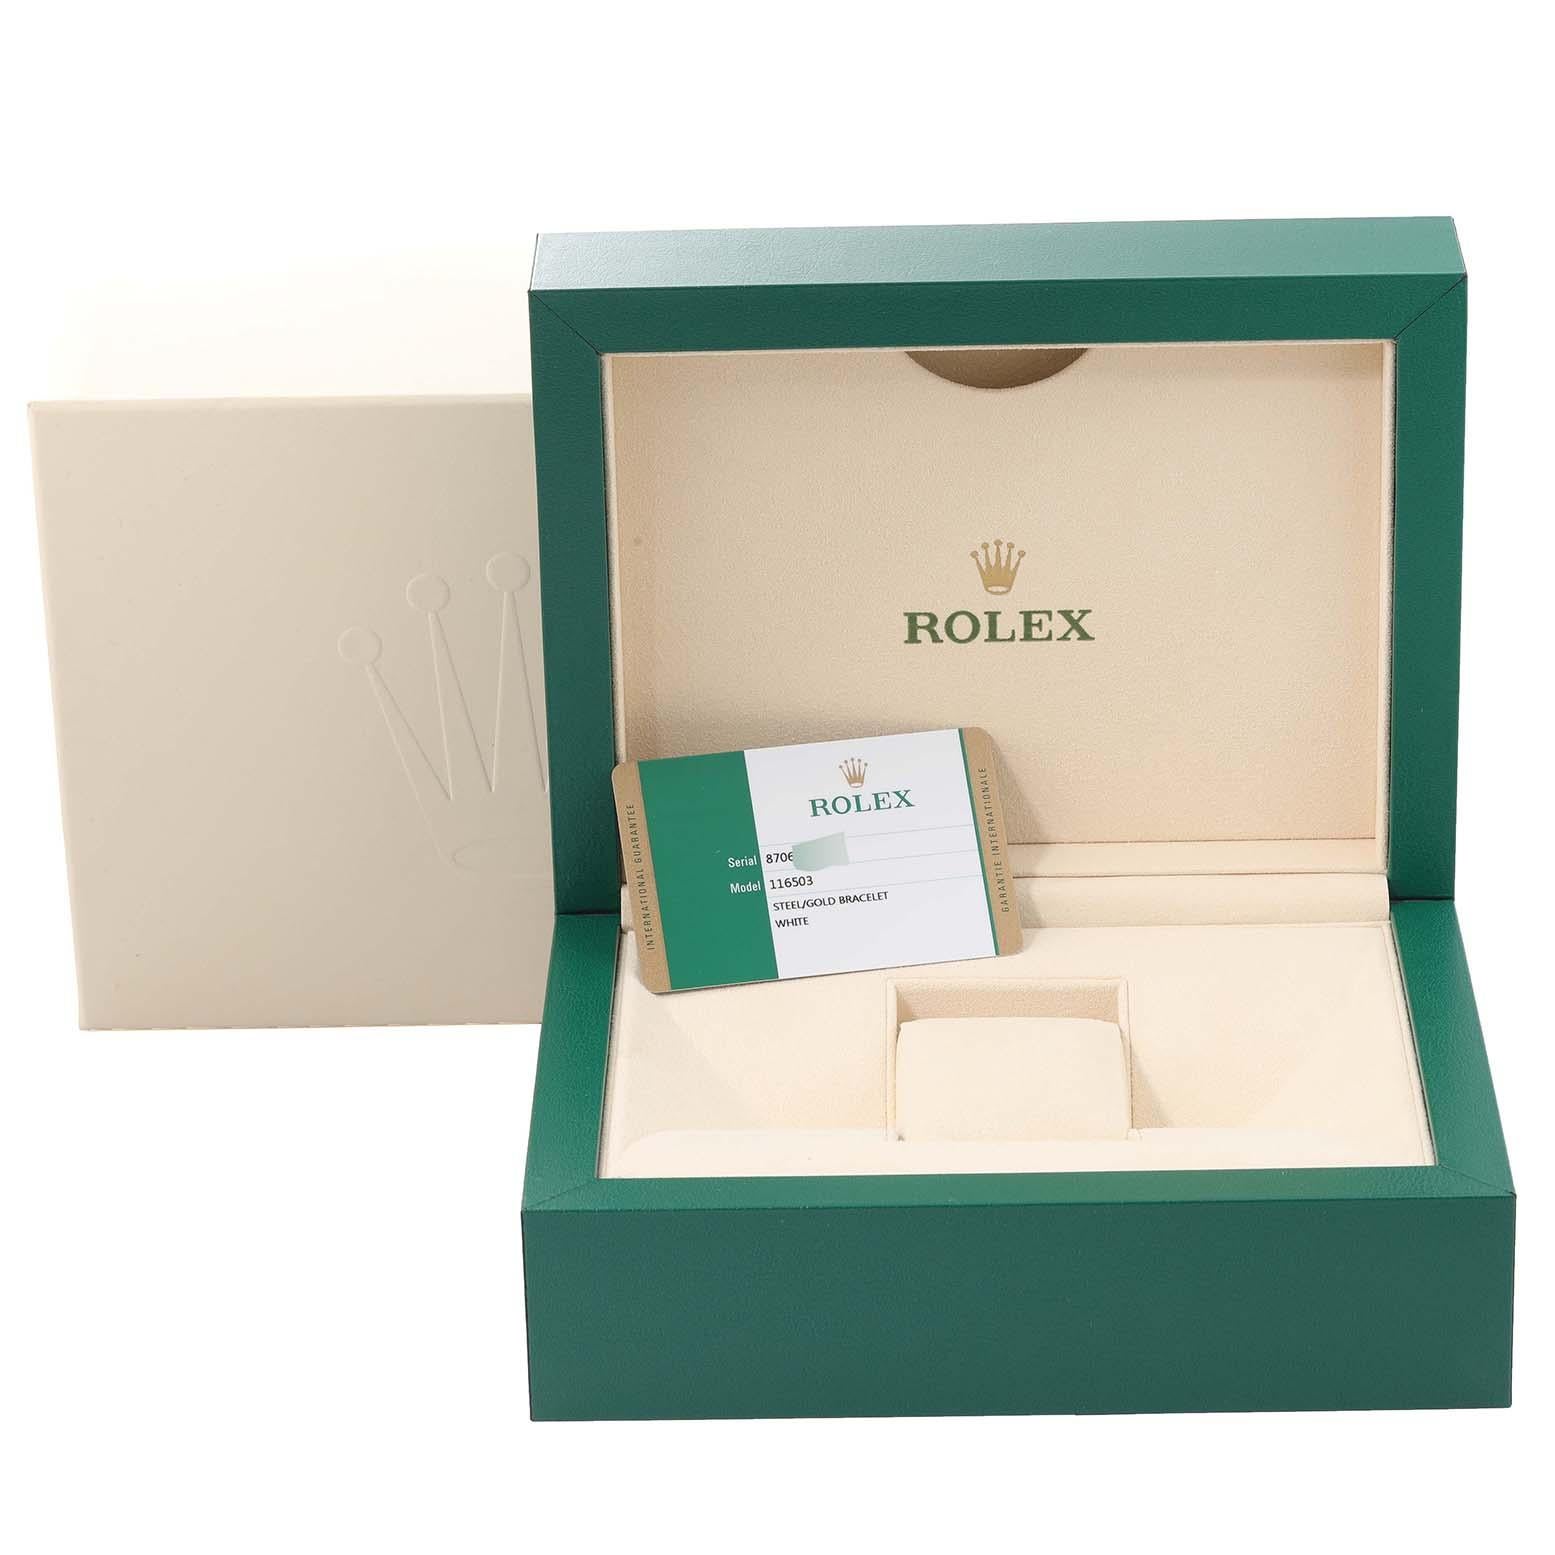 Rolex Daytona Champagne Dial Steel Yellow Gold Mens Watch 116503 Box Card For Sale 5